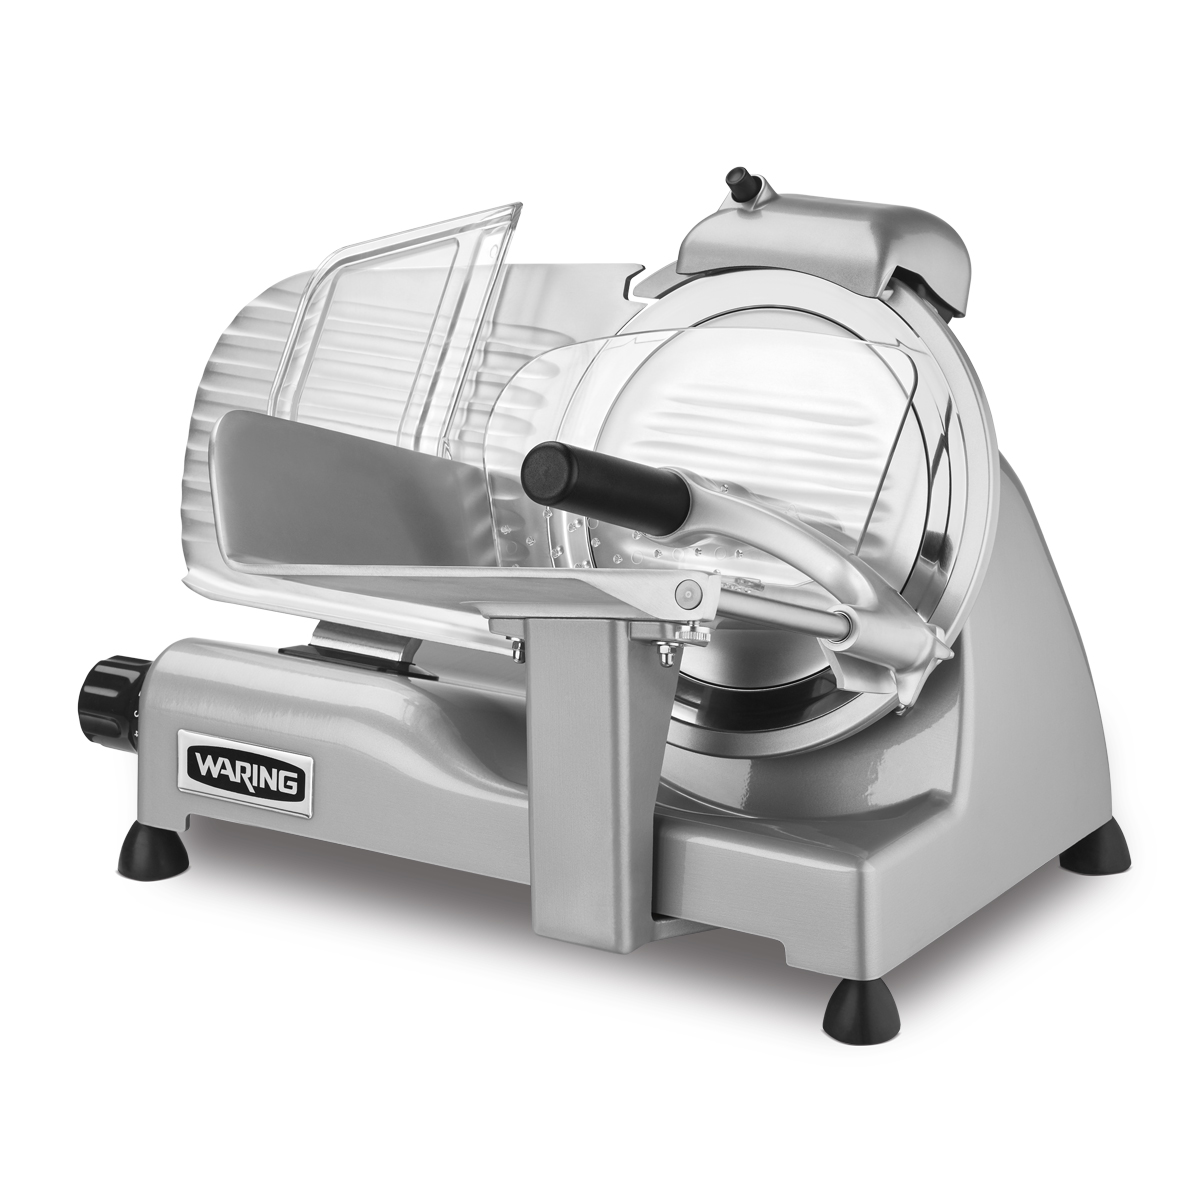 https://www.waringcommercialproducts.com/files/products/wcs220sv-professional-food-slicer-inset-1-1200x1200.jpg